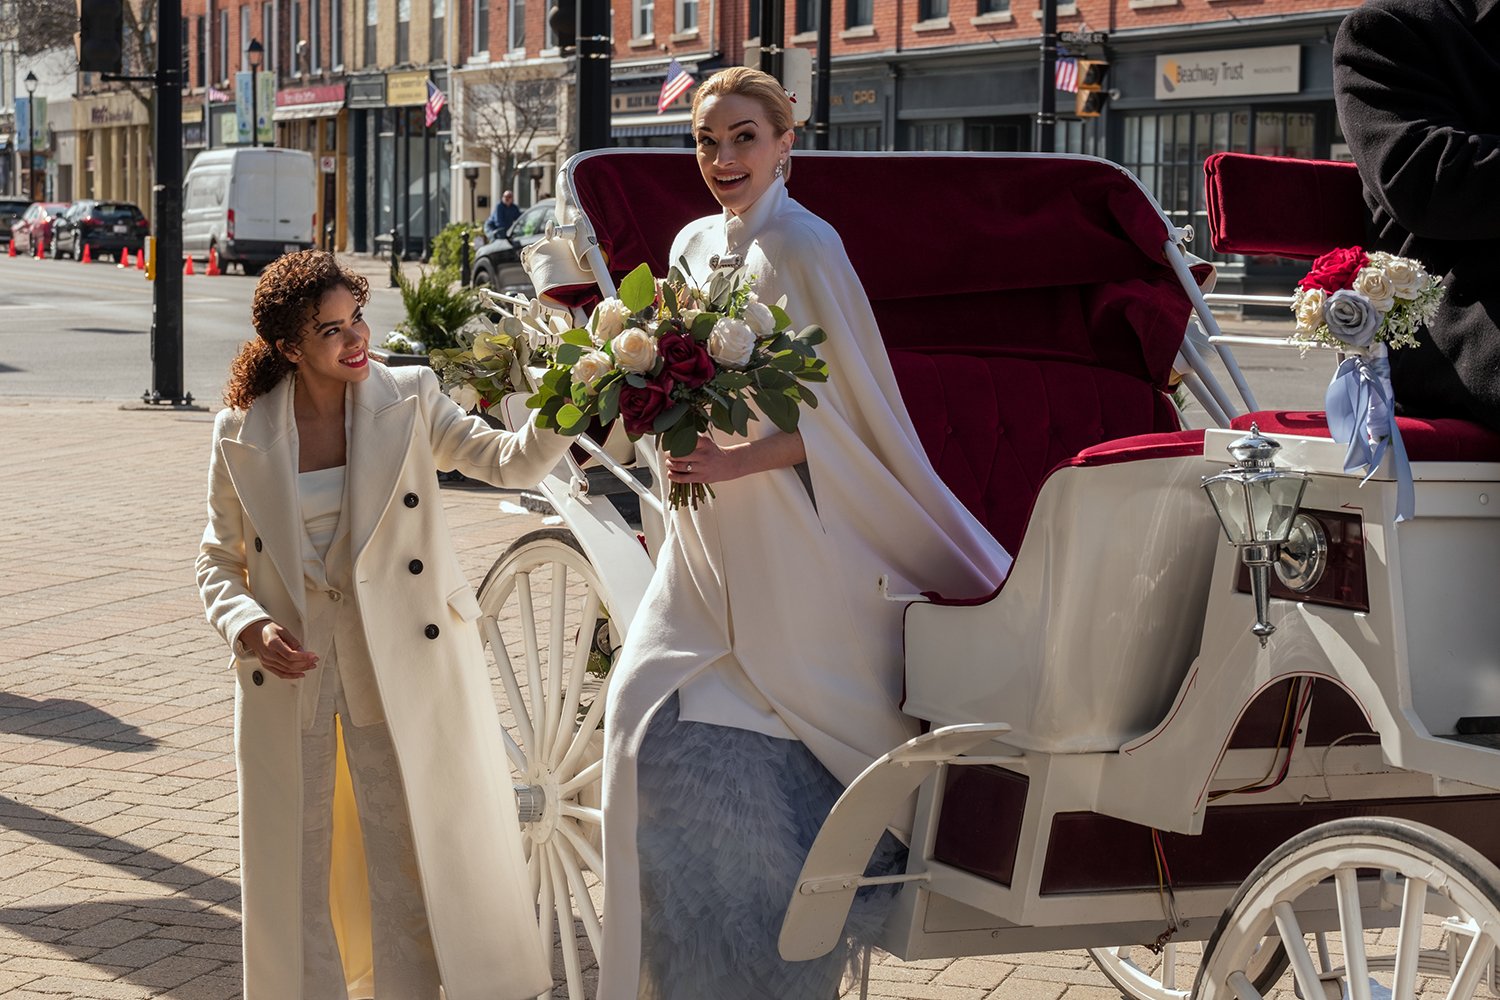 Antonia Gentry and Brianne Howey exit a horse-drawn carriage in Ginny & Georgia